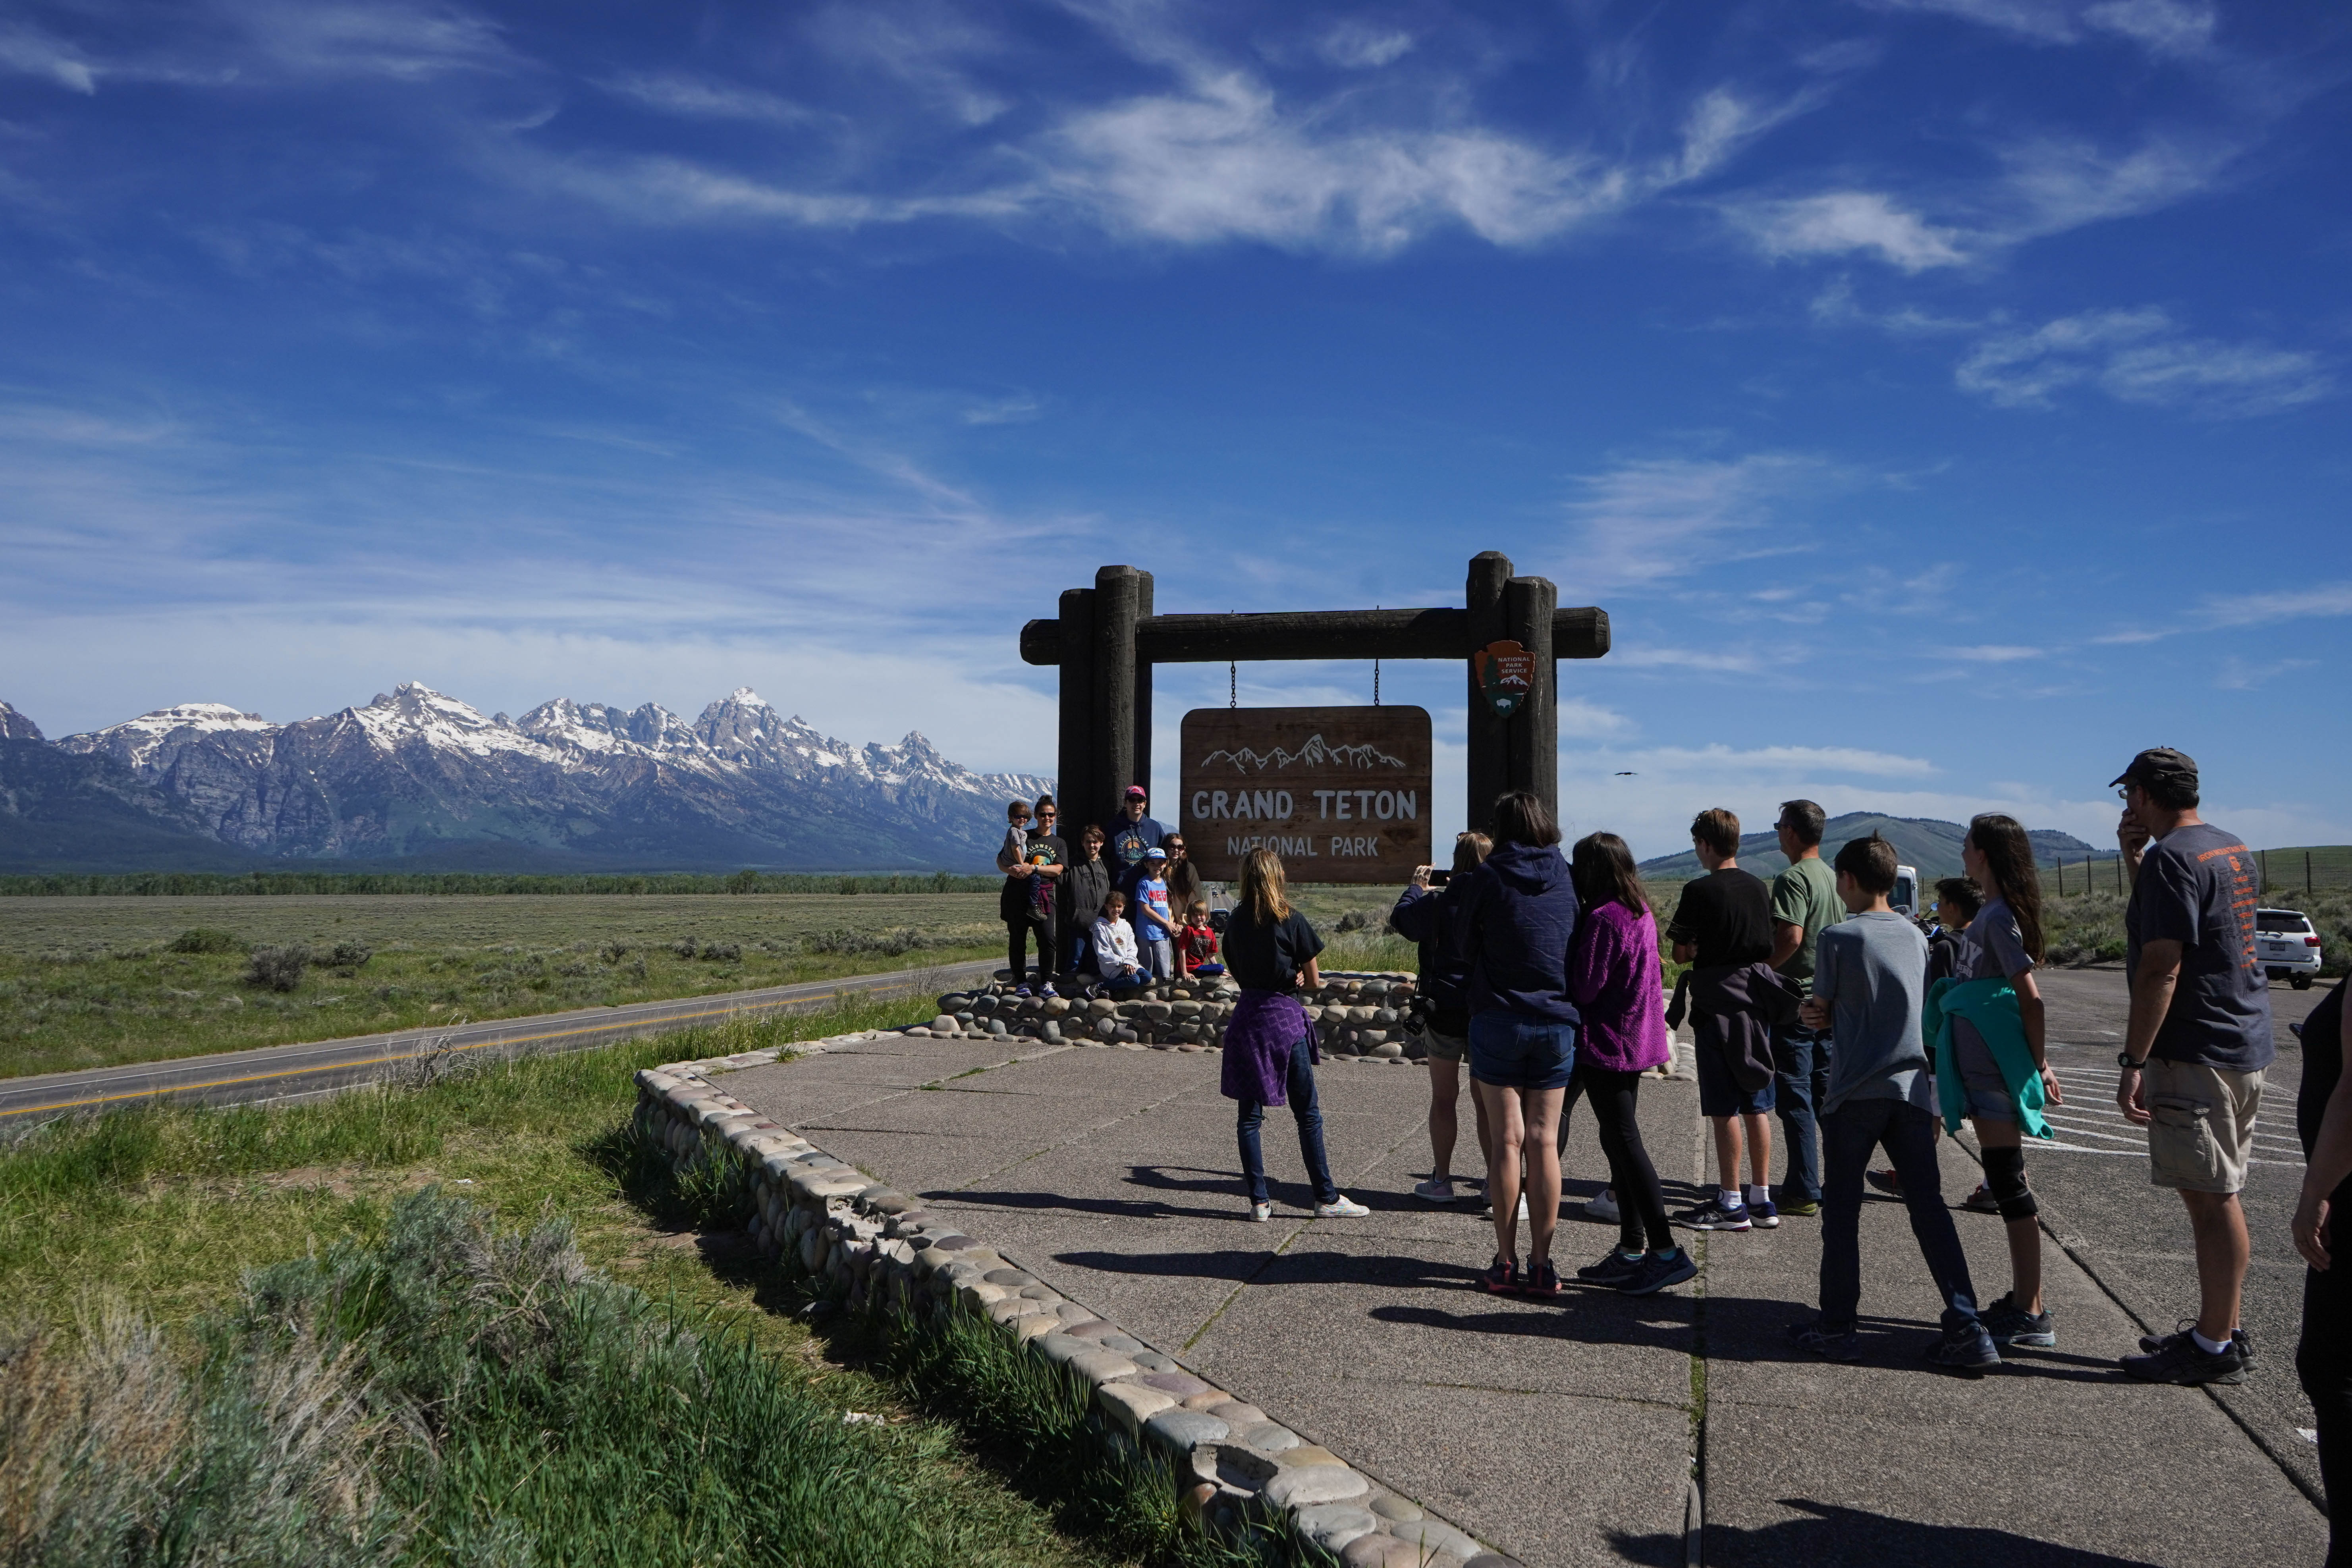 groups of people by a Grand Teton sign